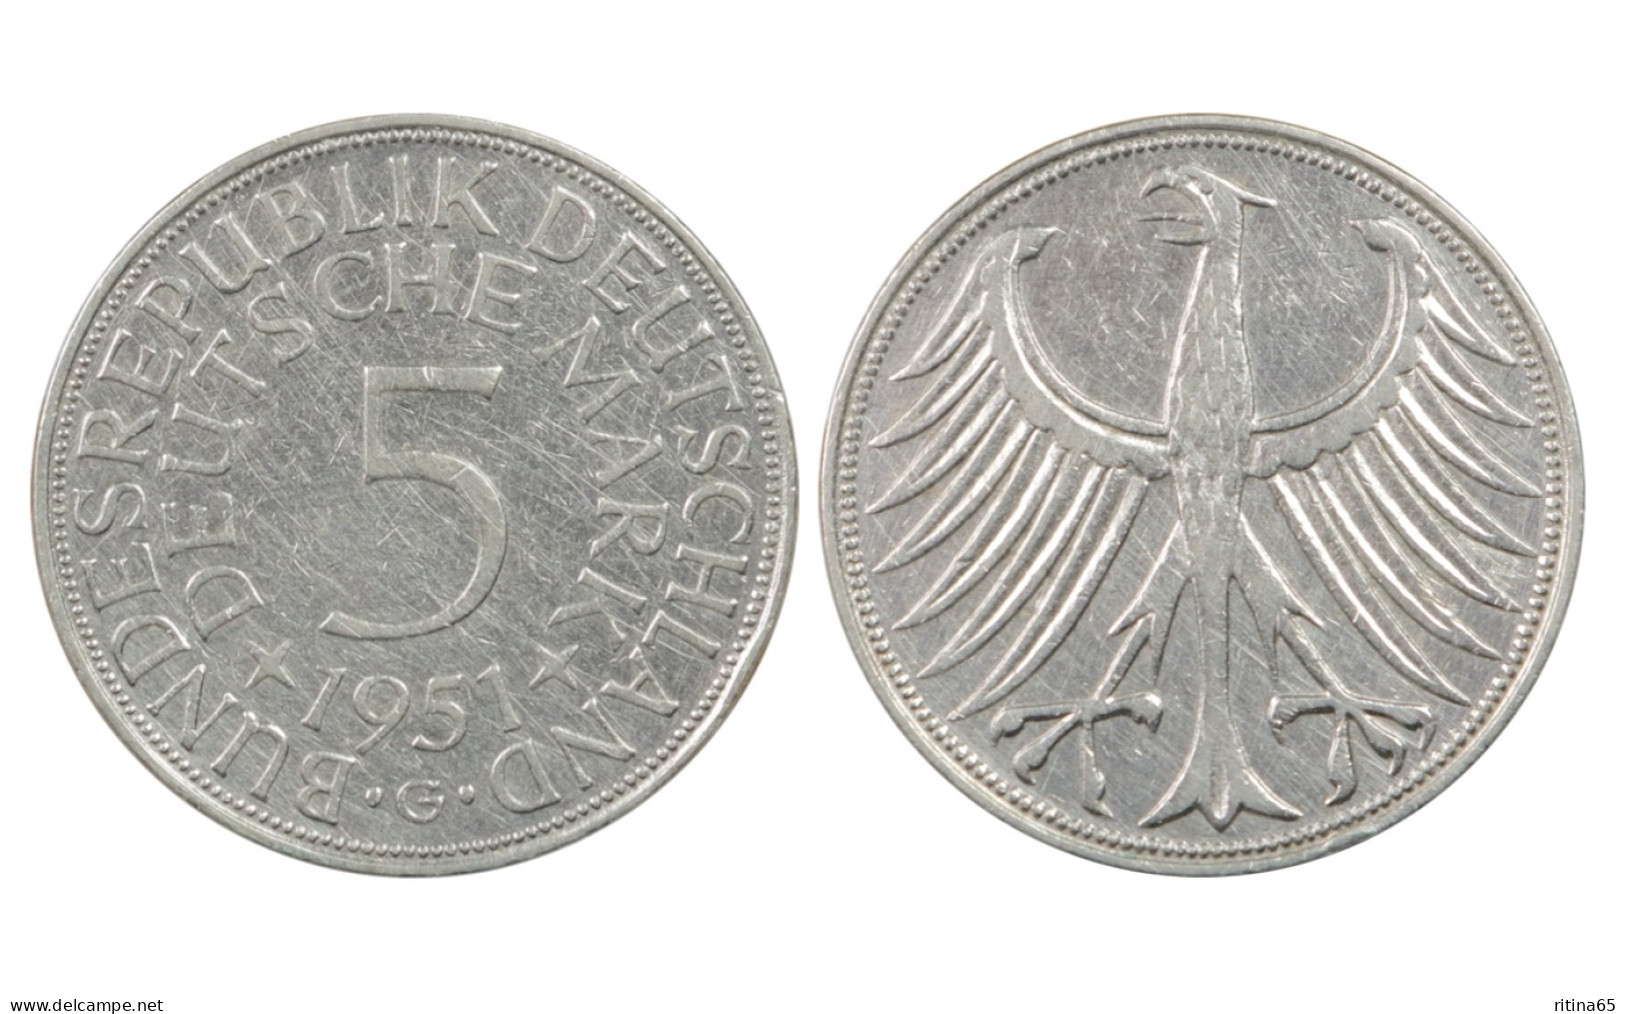 GERMANIA !!! 5 MARK 1951 G IN ARGENTO KM# 112 - 5 Marcos